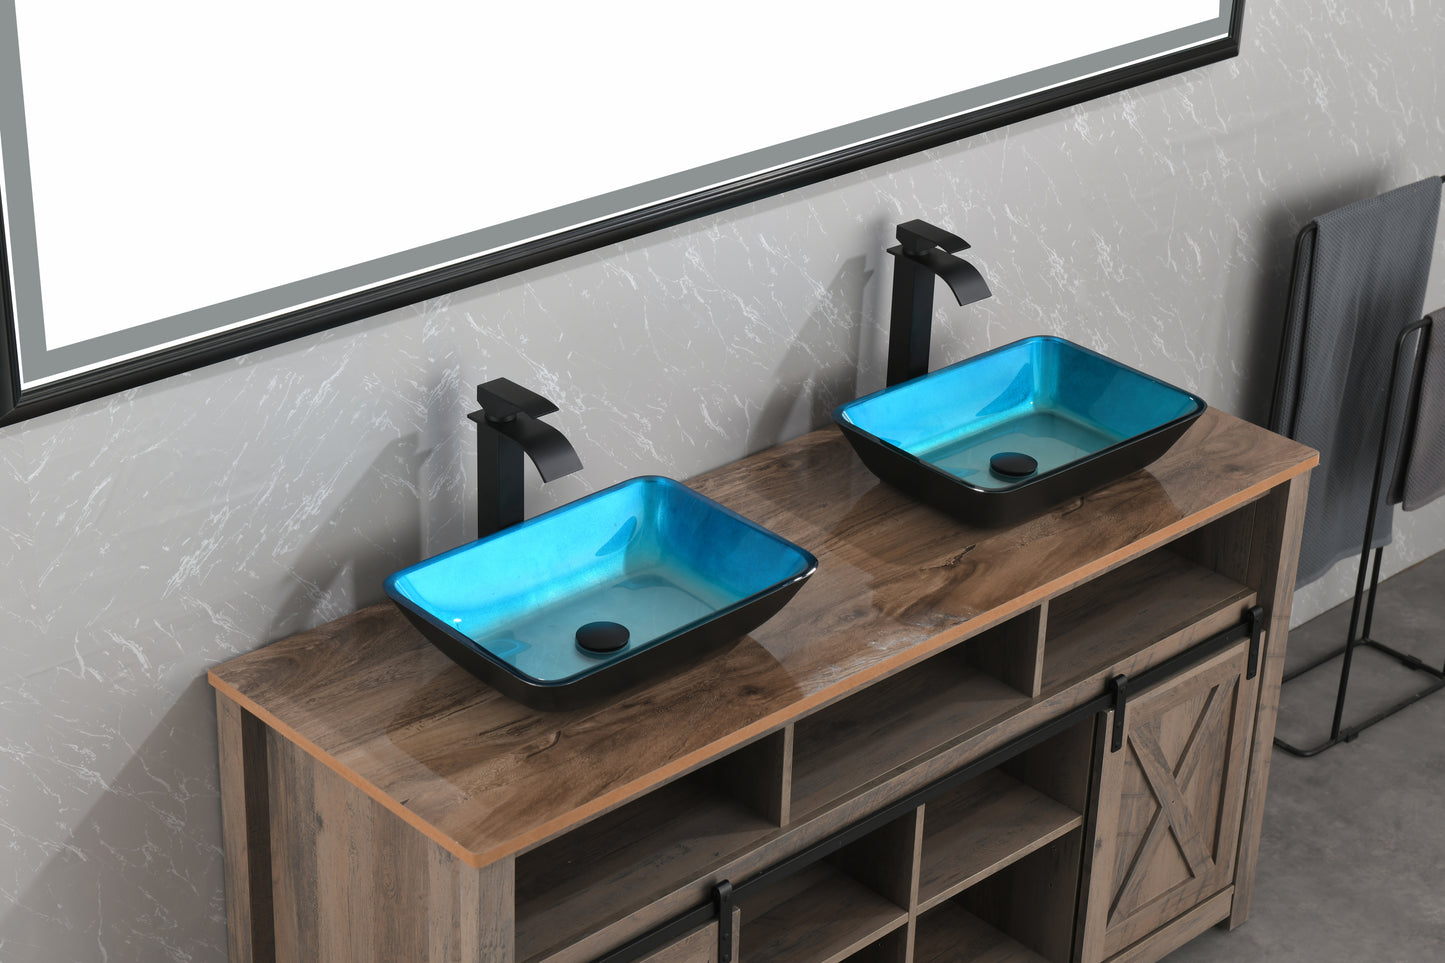 Handcrafted Turquoise Glass Vessel Bathroom Sink Set with Matte Black Faucet and Drain